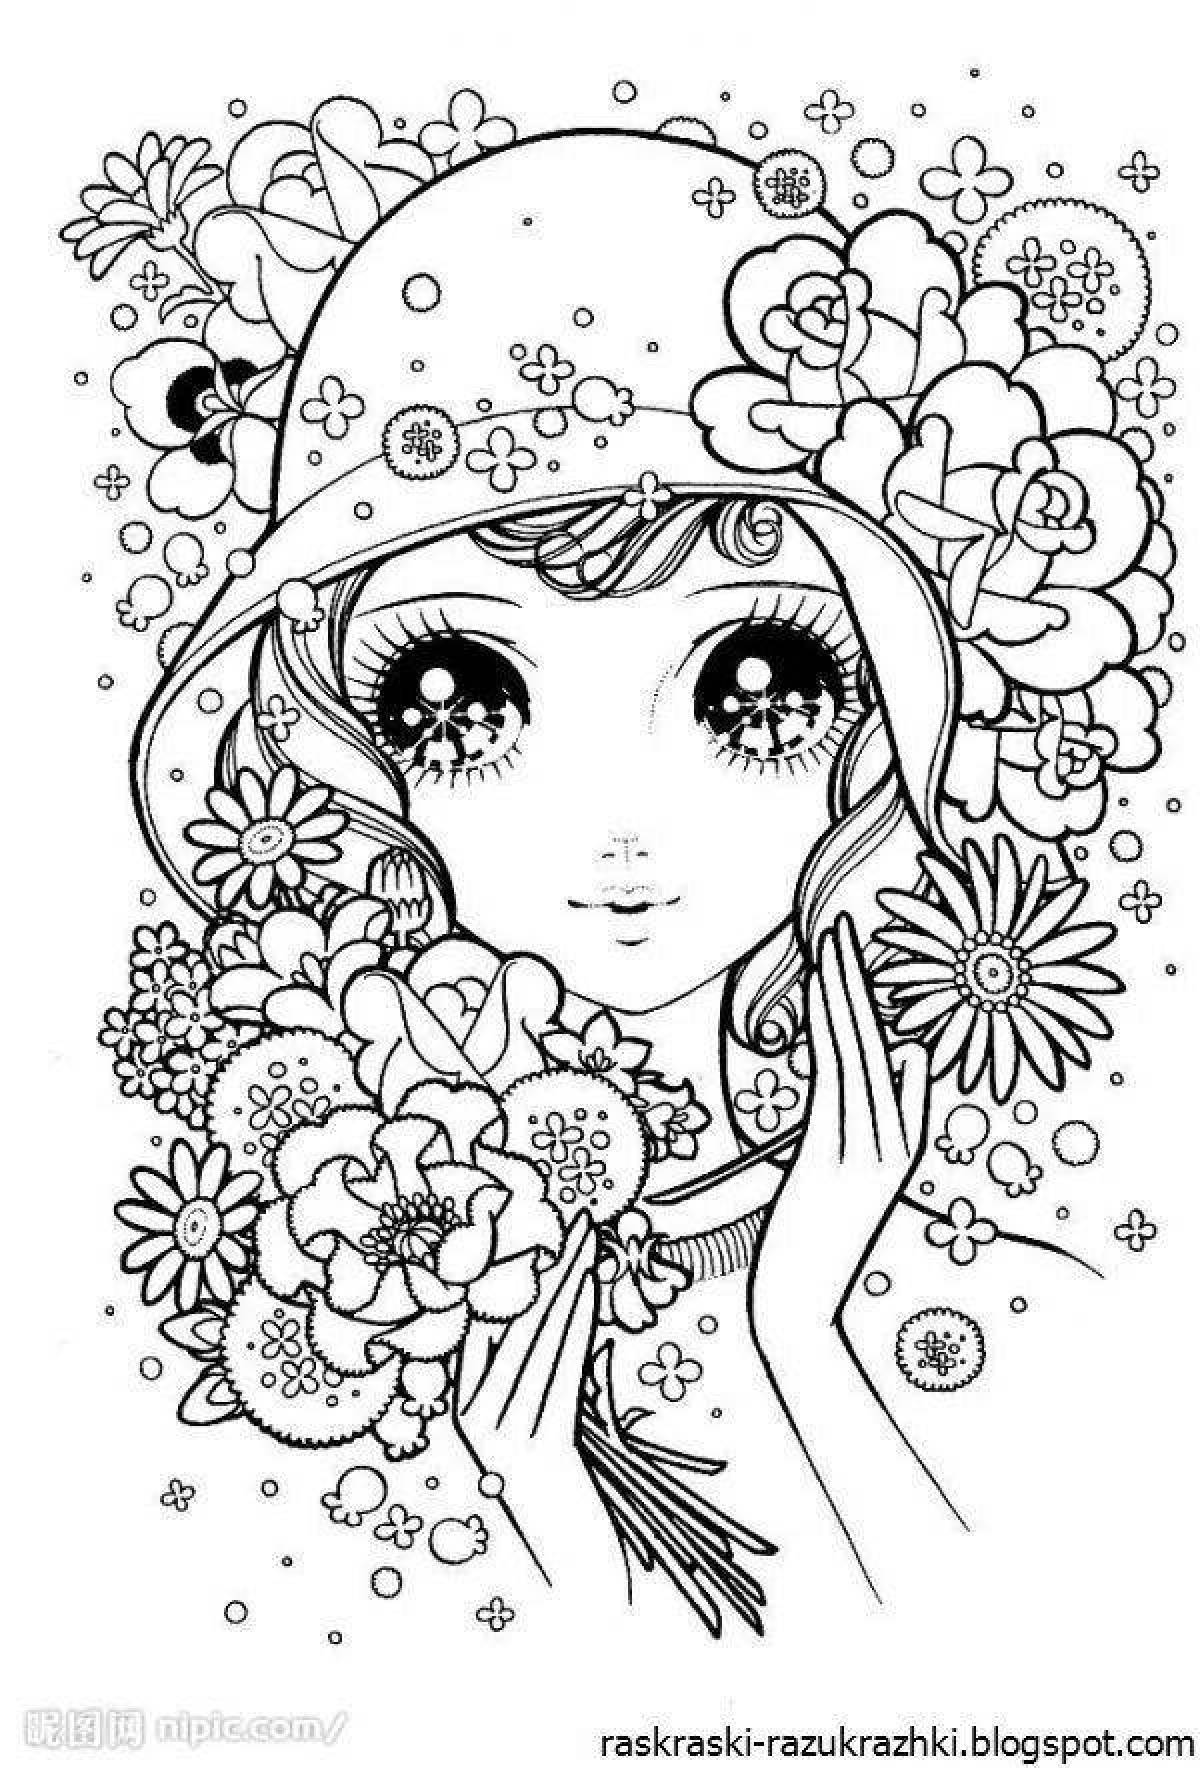 Delightful coloring book for girls 9-10 years old